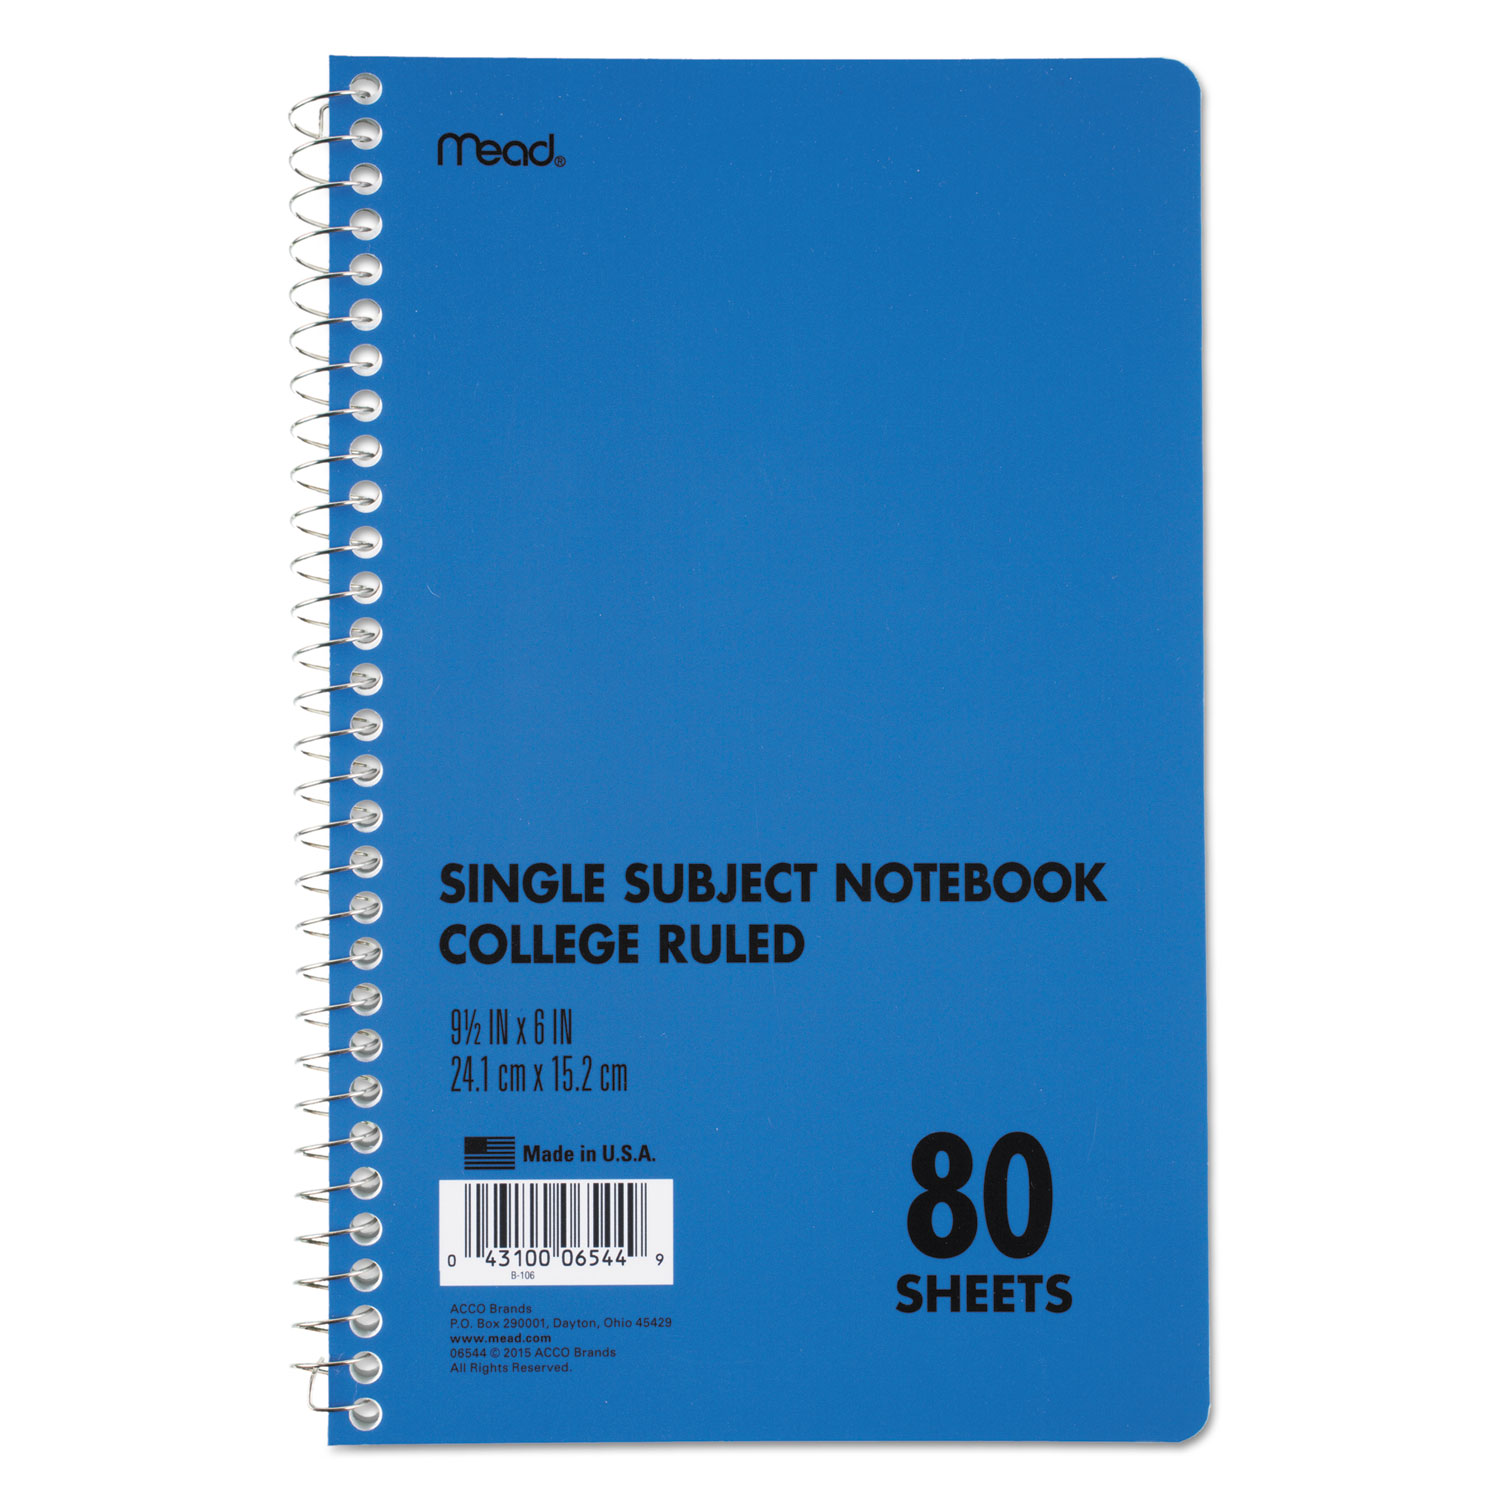  Mead 06544 DuraPress Cover Notebook, 1 Subject, Medium/College Rule, Blue Cover, 9 x 6, 80 Sheets (MEA06544) 